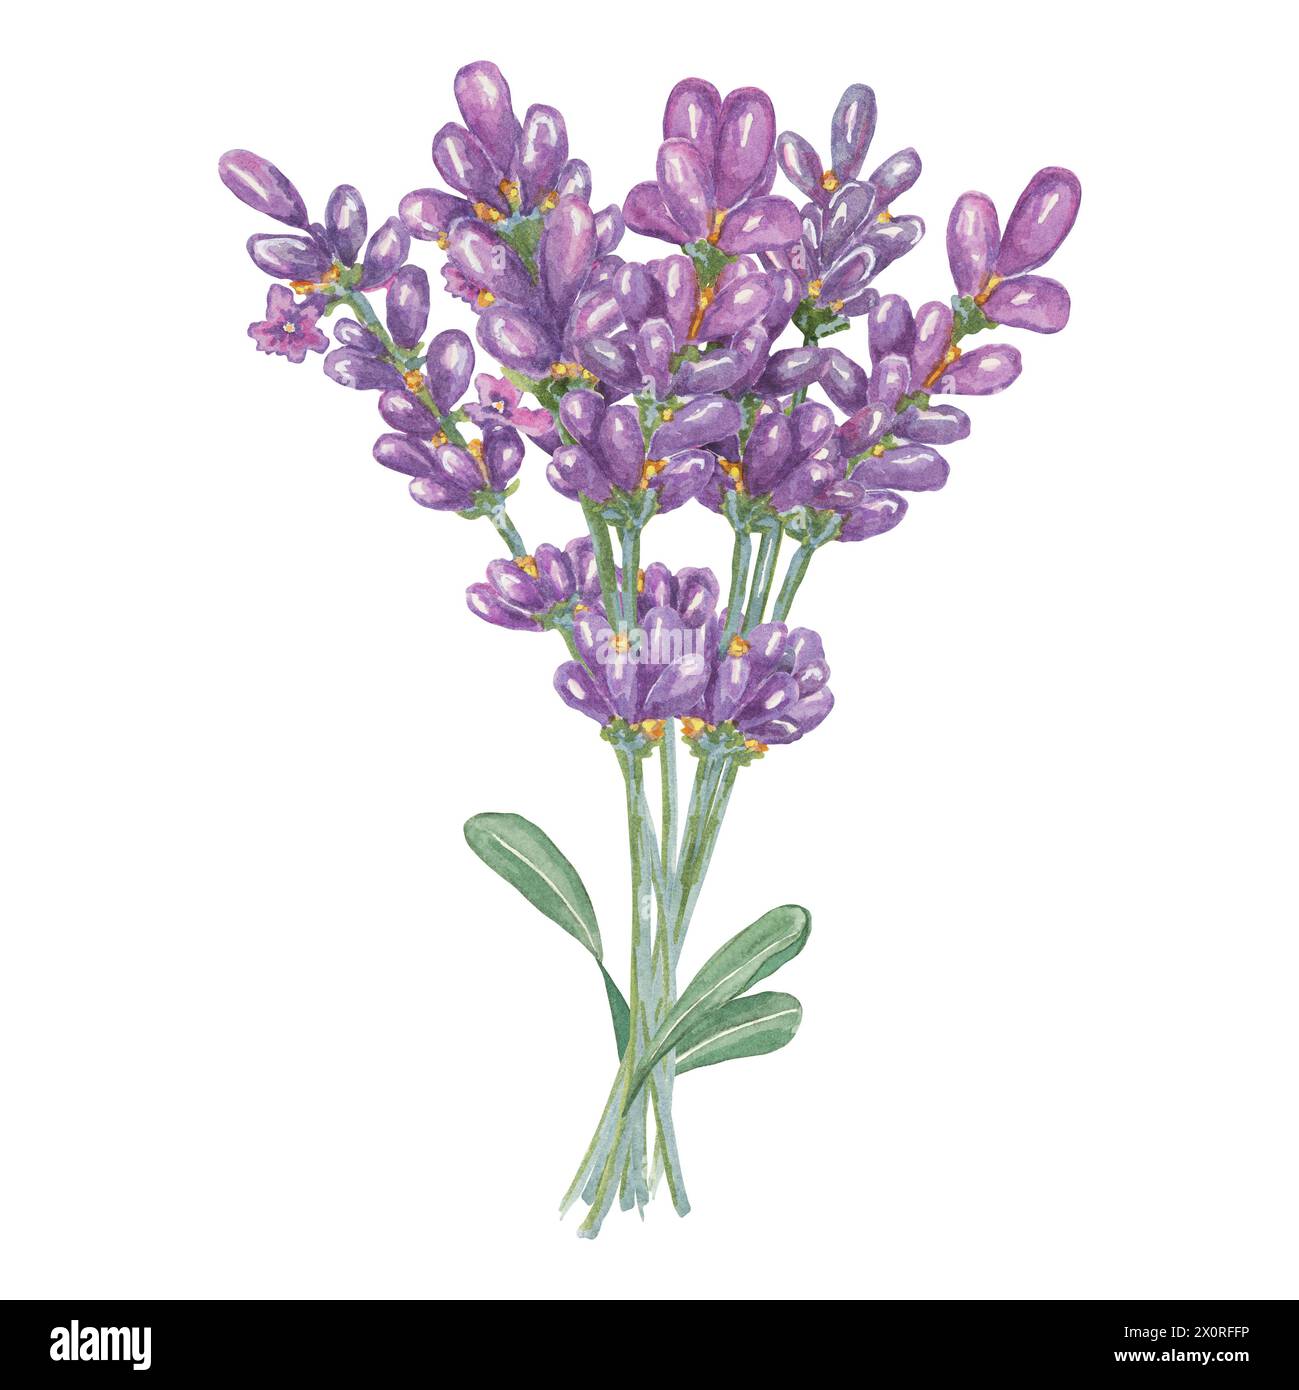 Lavender bouquet of purple, periwinkle, lilac flowers composition. Hand drawn lavandula watercolor clipart. Isolated design for beauty, cosmetics, labels, organic products, spa, aromatherapy, wellness Stock Photo